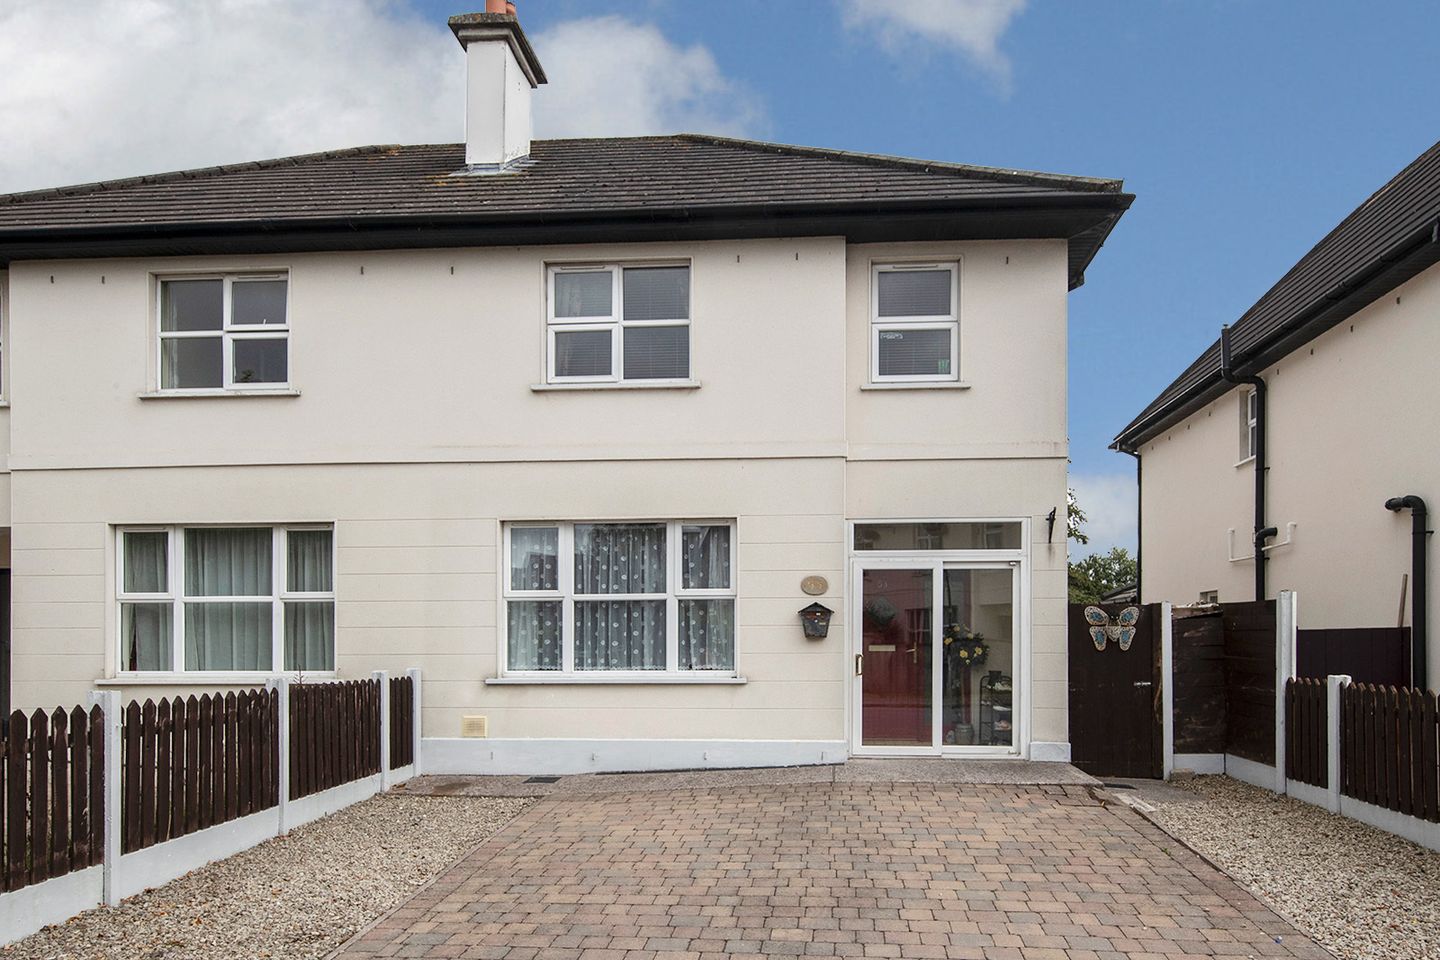 53 The Mills, Ballysaggart Beg, Lismore, Co. Waterford